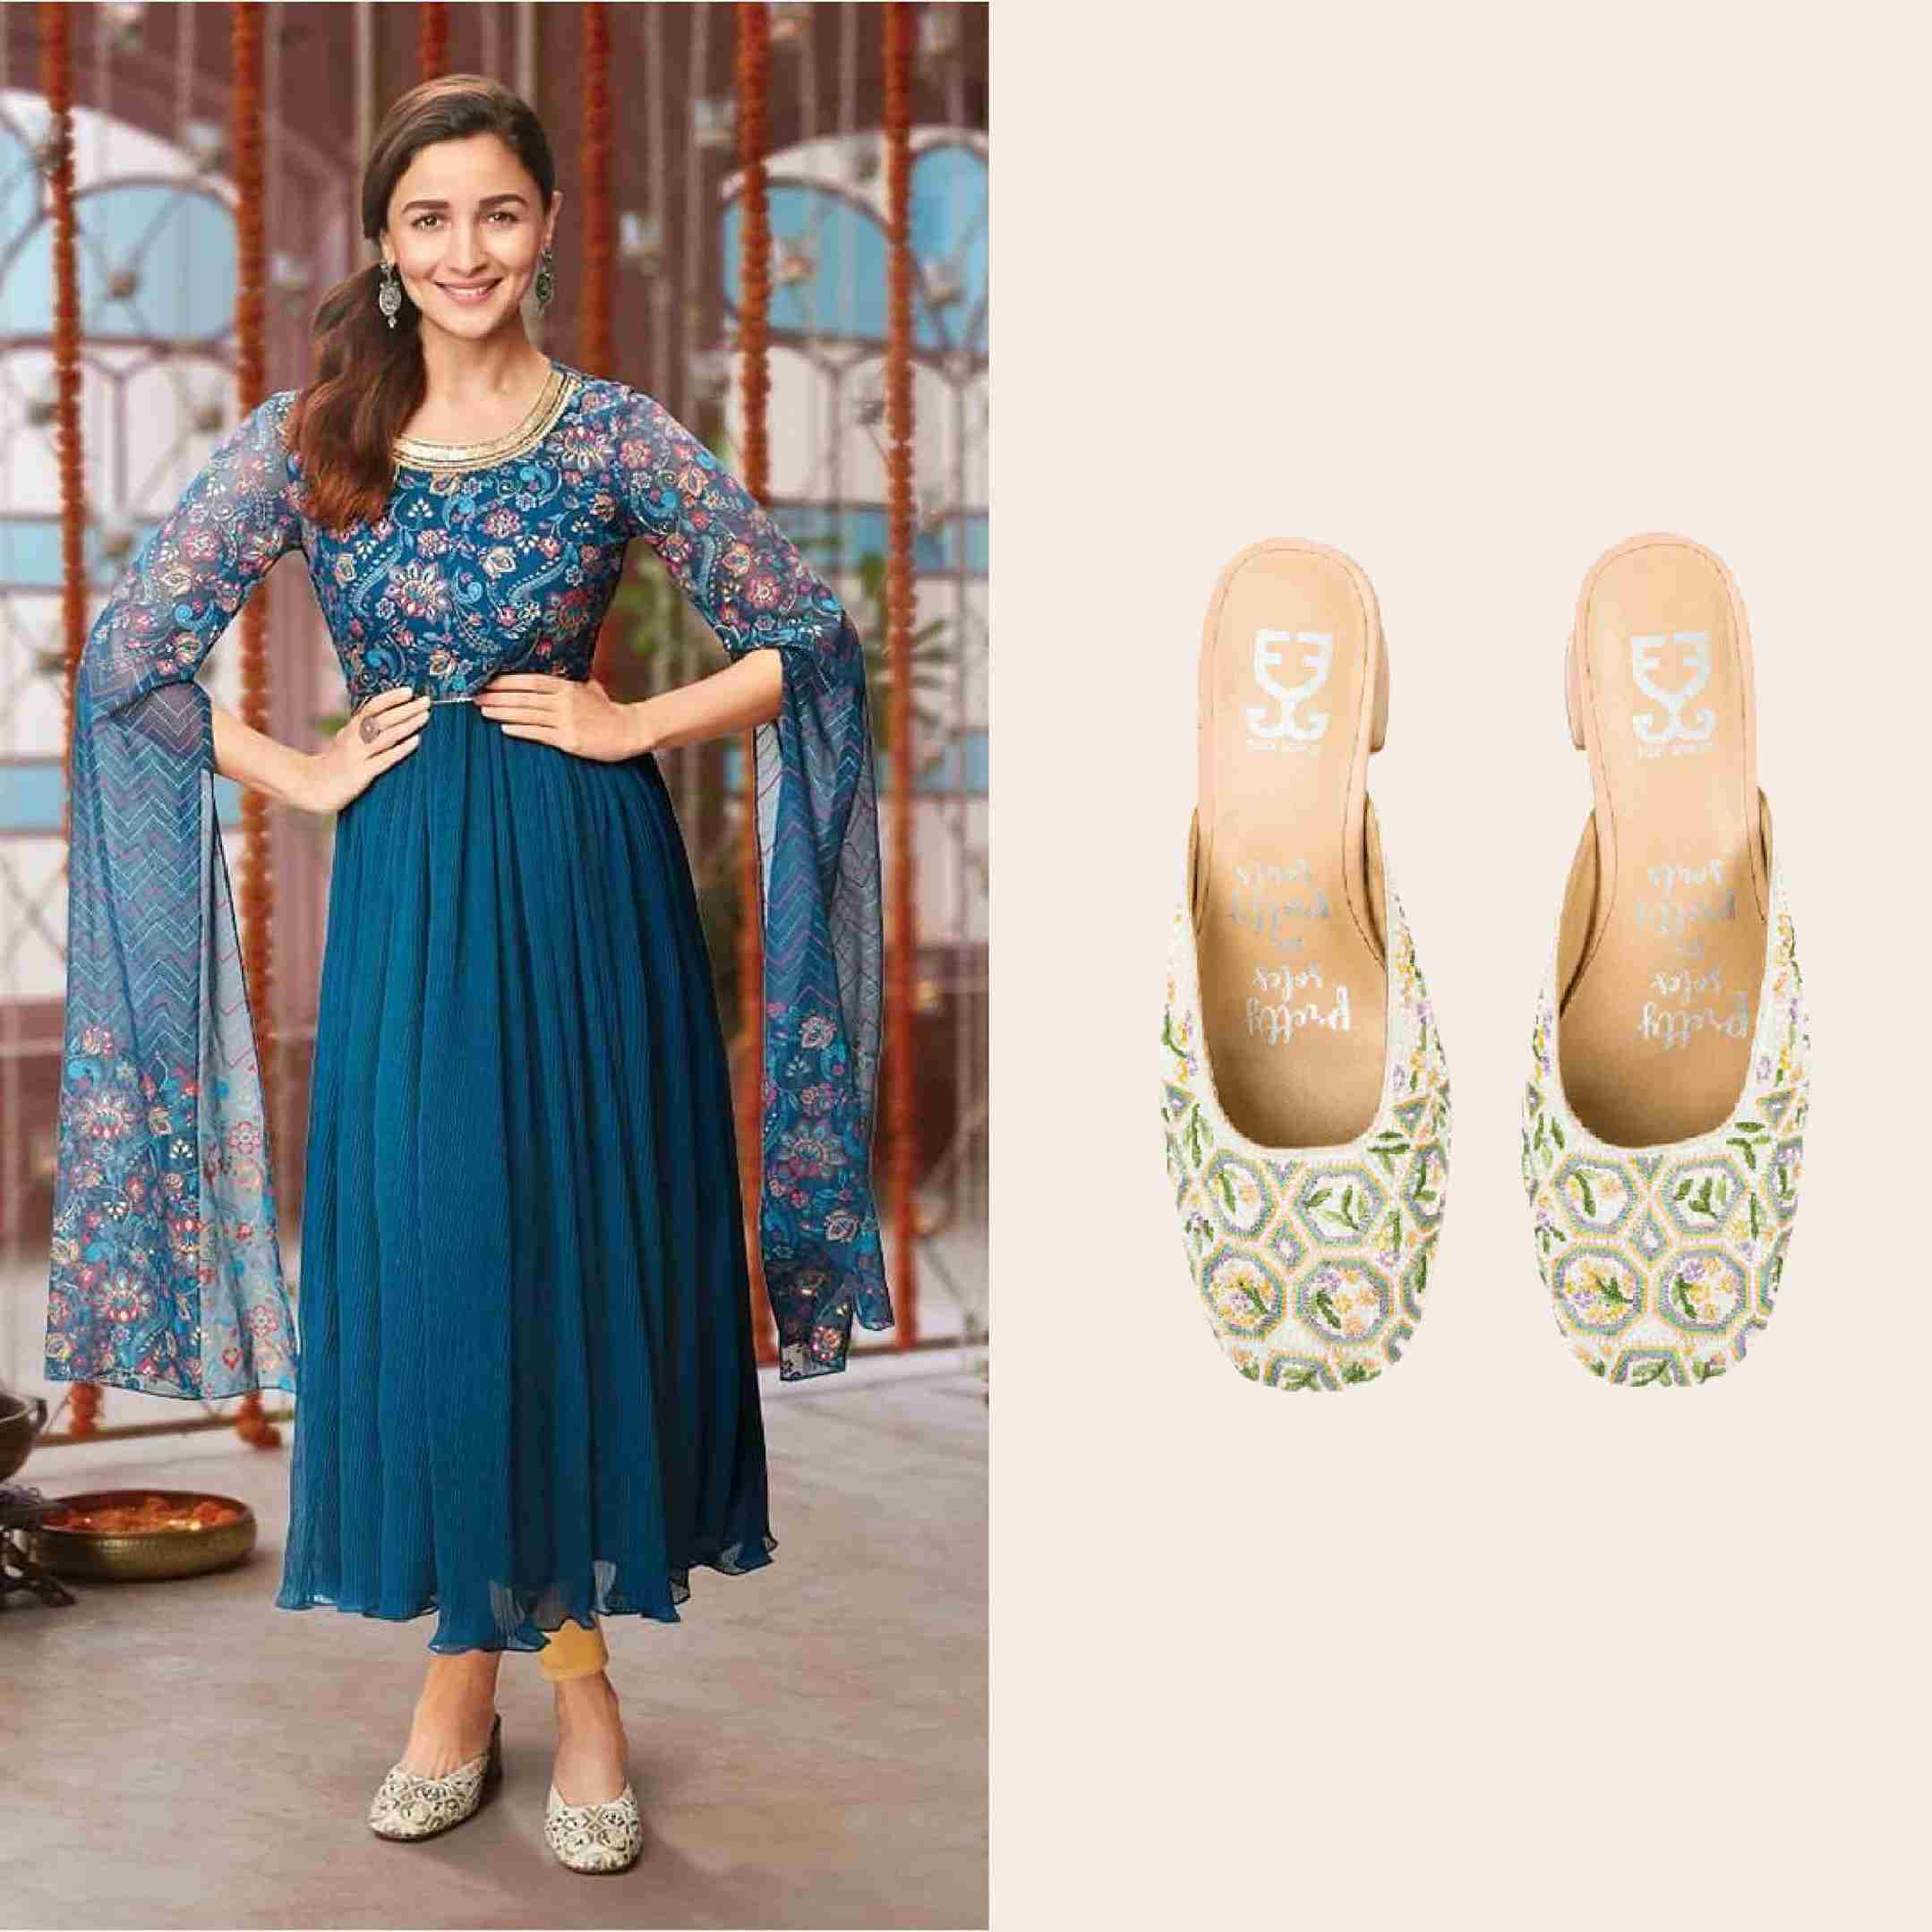 Fizzy Goblet - Loved spotting these heels on Alia Bhatt? You can now find  them at a Fizzy Goblet store near you or shop them on www.fizzygoblet.com  😍